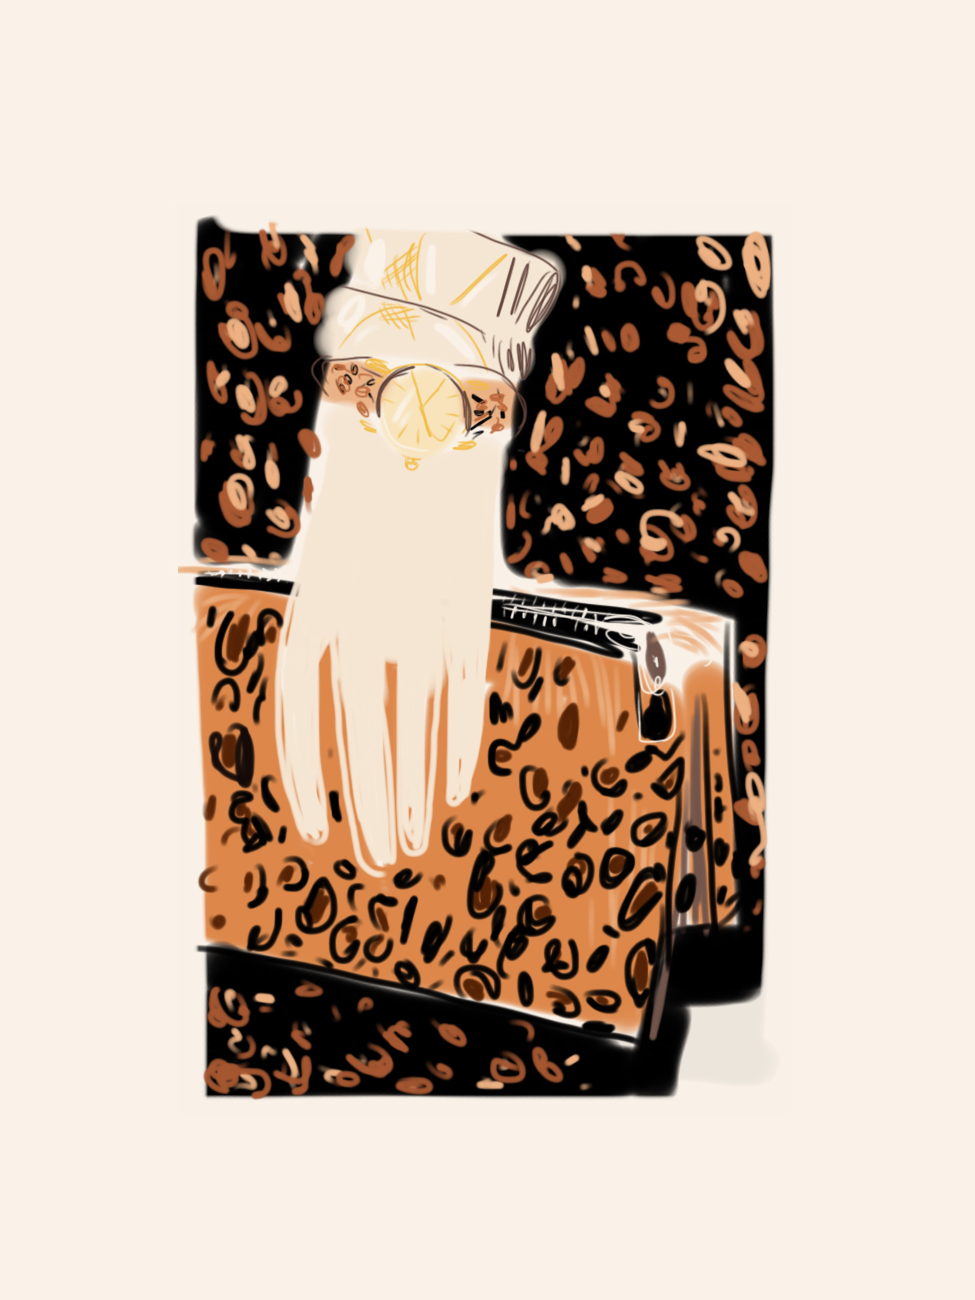 Leopard bag, watch and gloves. Fashion illustration by Silvana Mariani